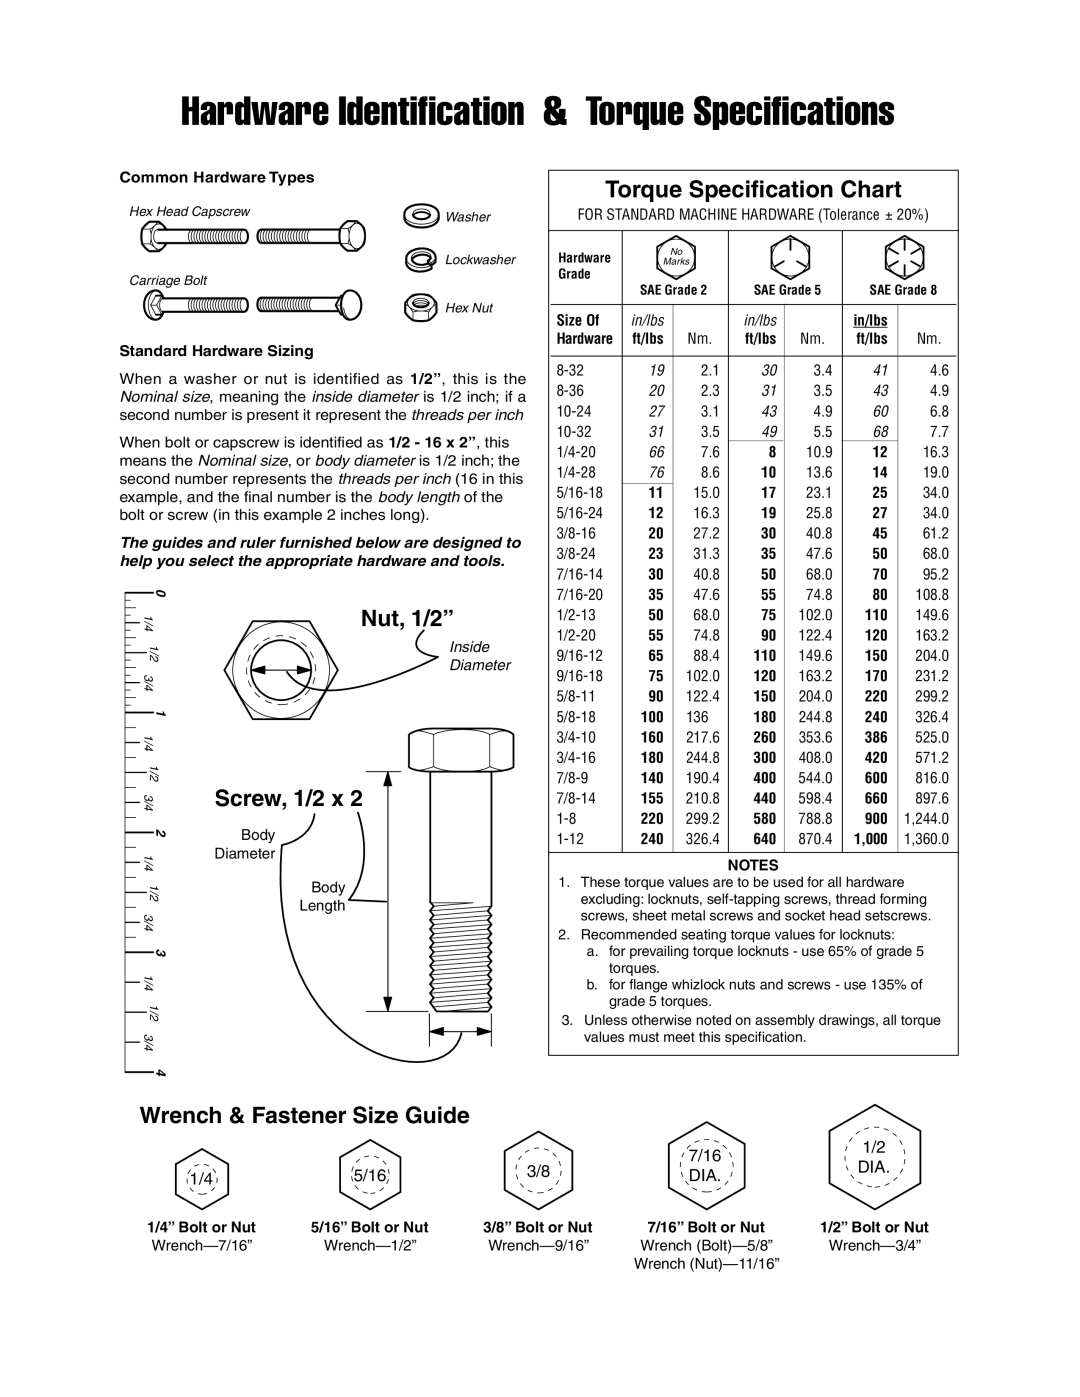 Simplicity 1694838 Wrench & Fastener Size Guide, Common Hardware Types, Standard Hardware Sizing, 1/4” Bolt or Nut, 7/16 